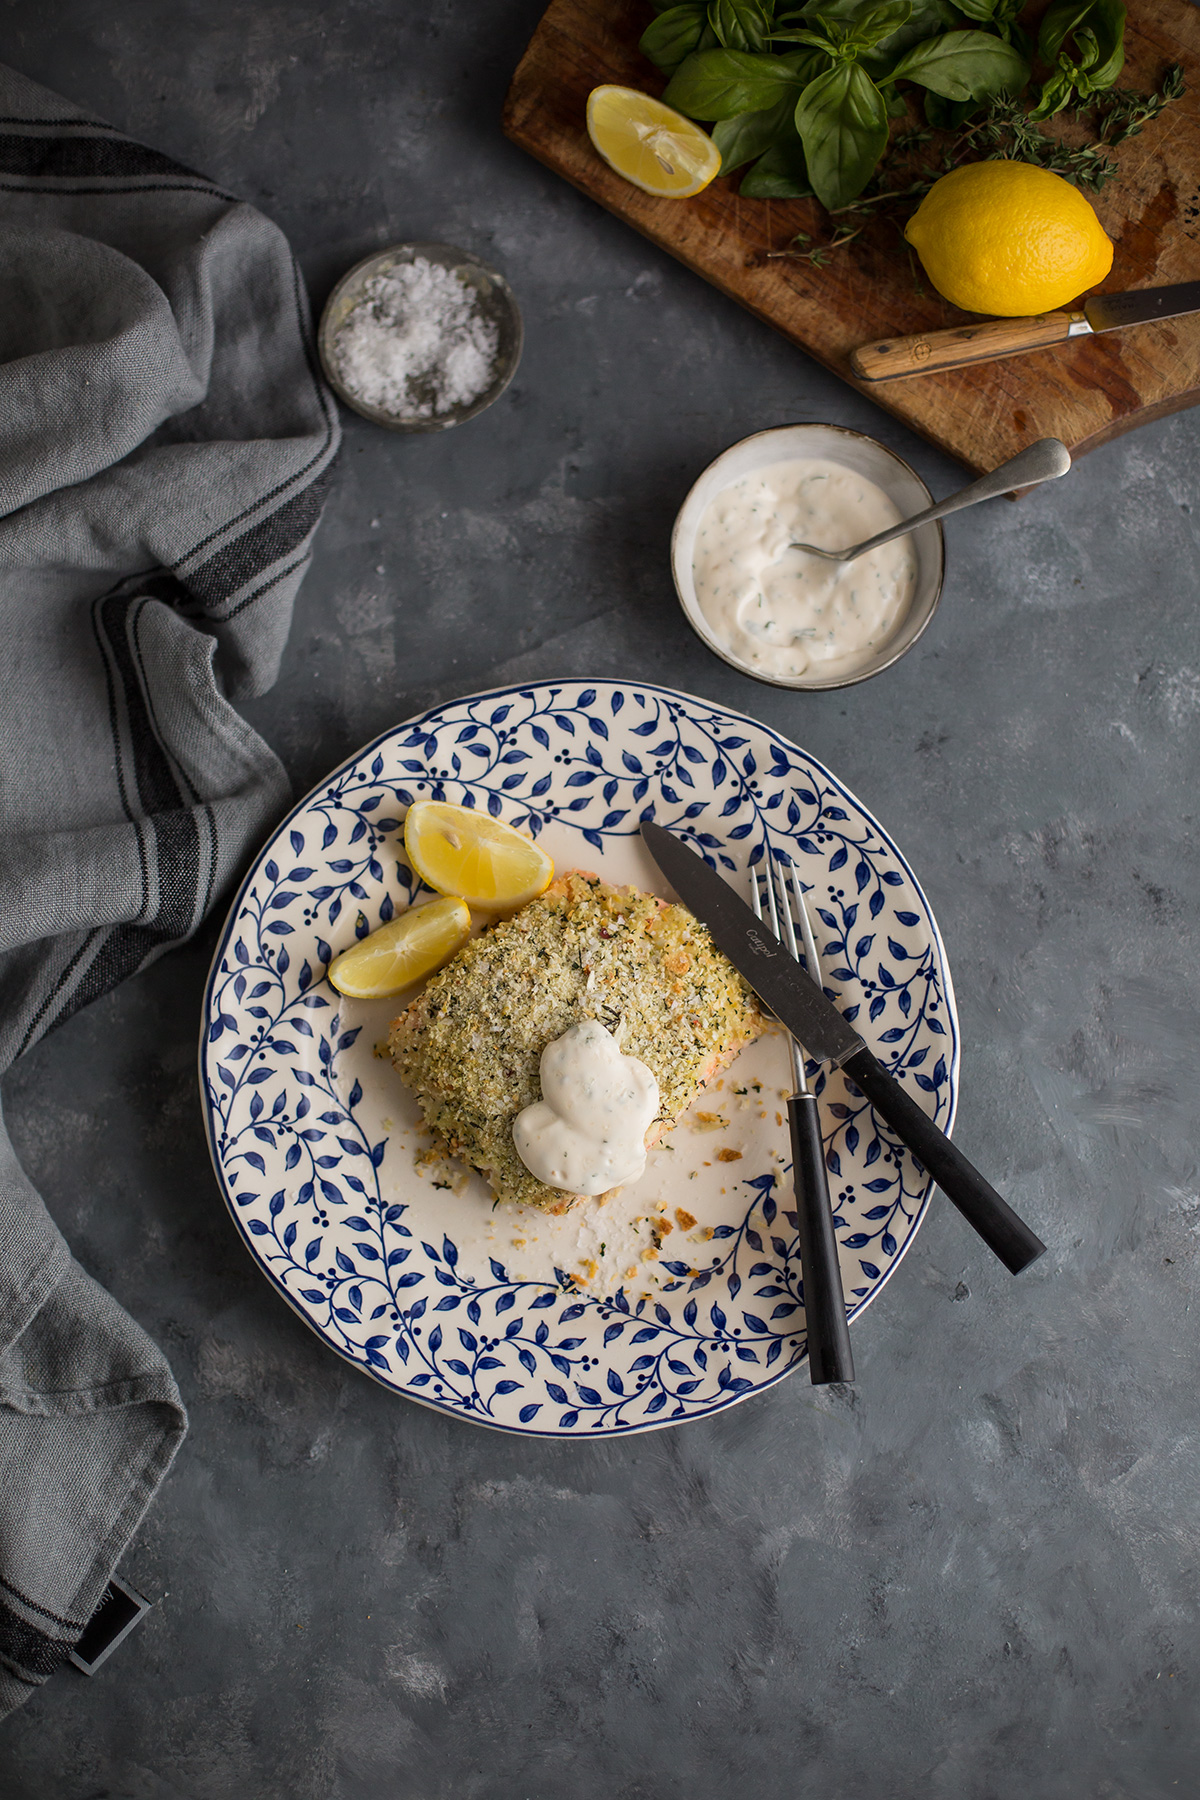 Easy baked salmon with a lemon & herb crumb